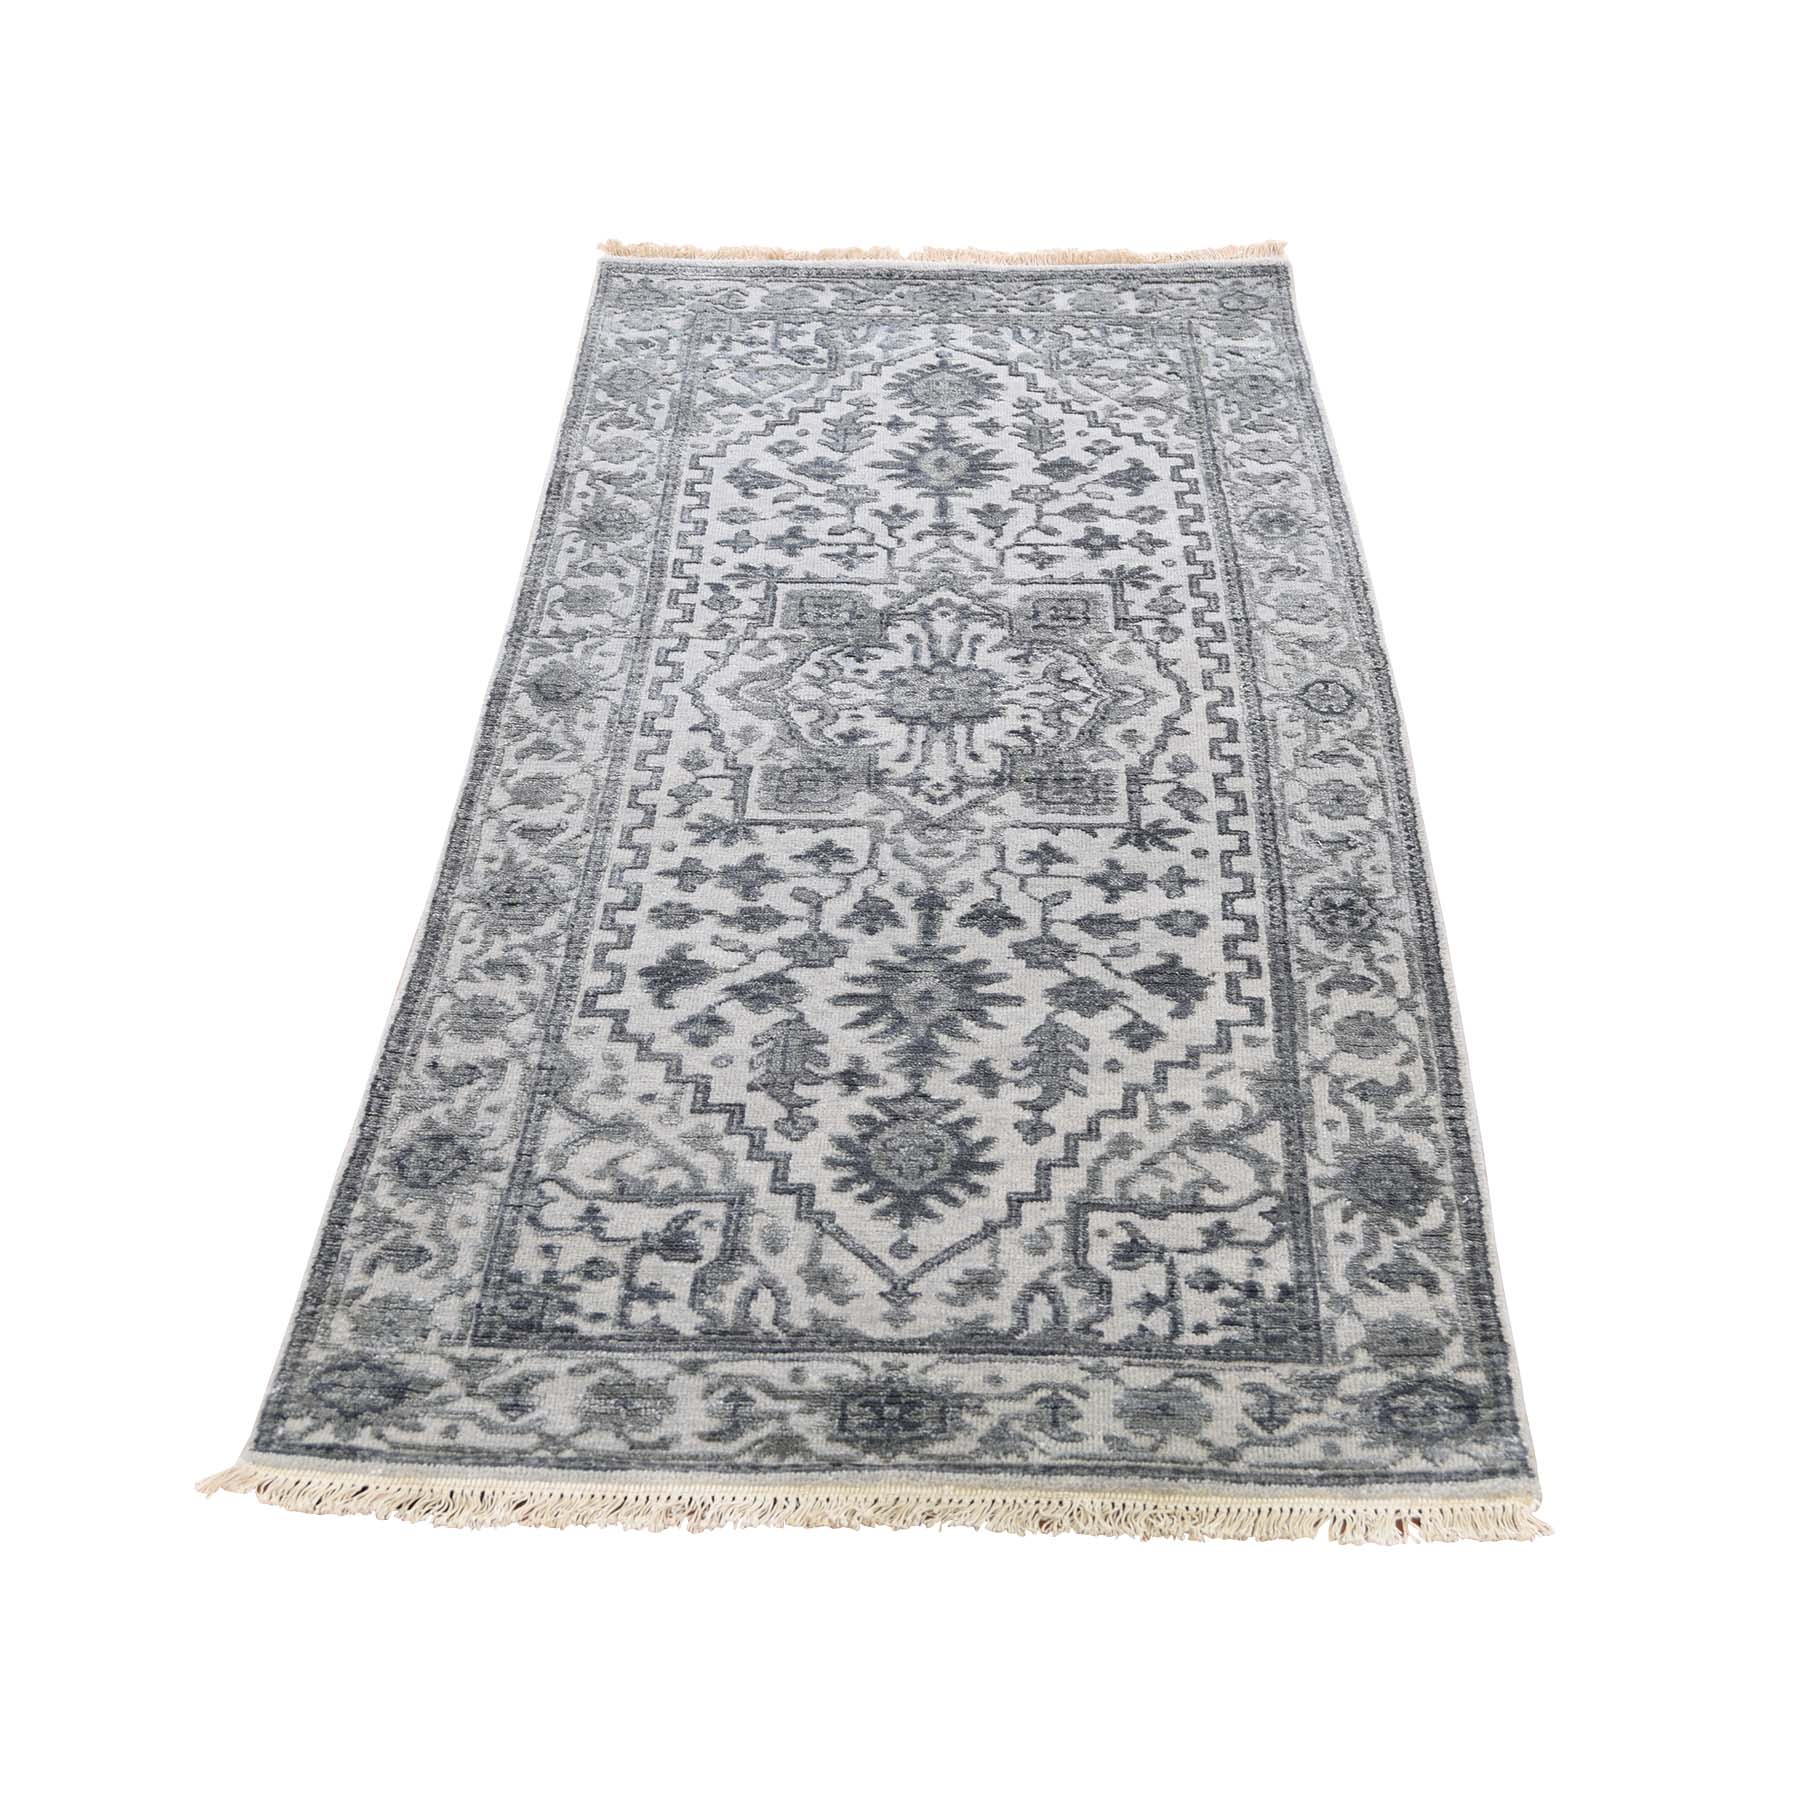 Casual Silk Hand-Knotted Area Rug 2'6